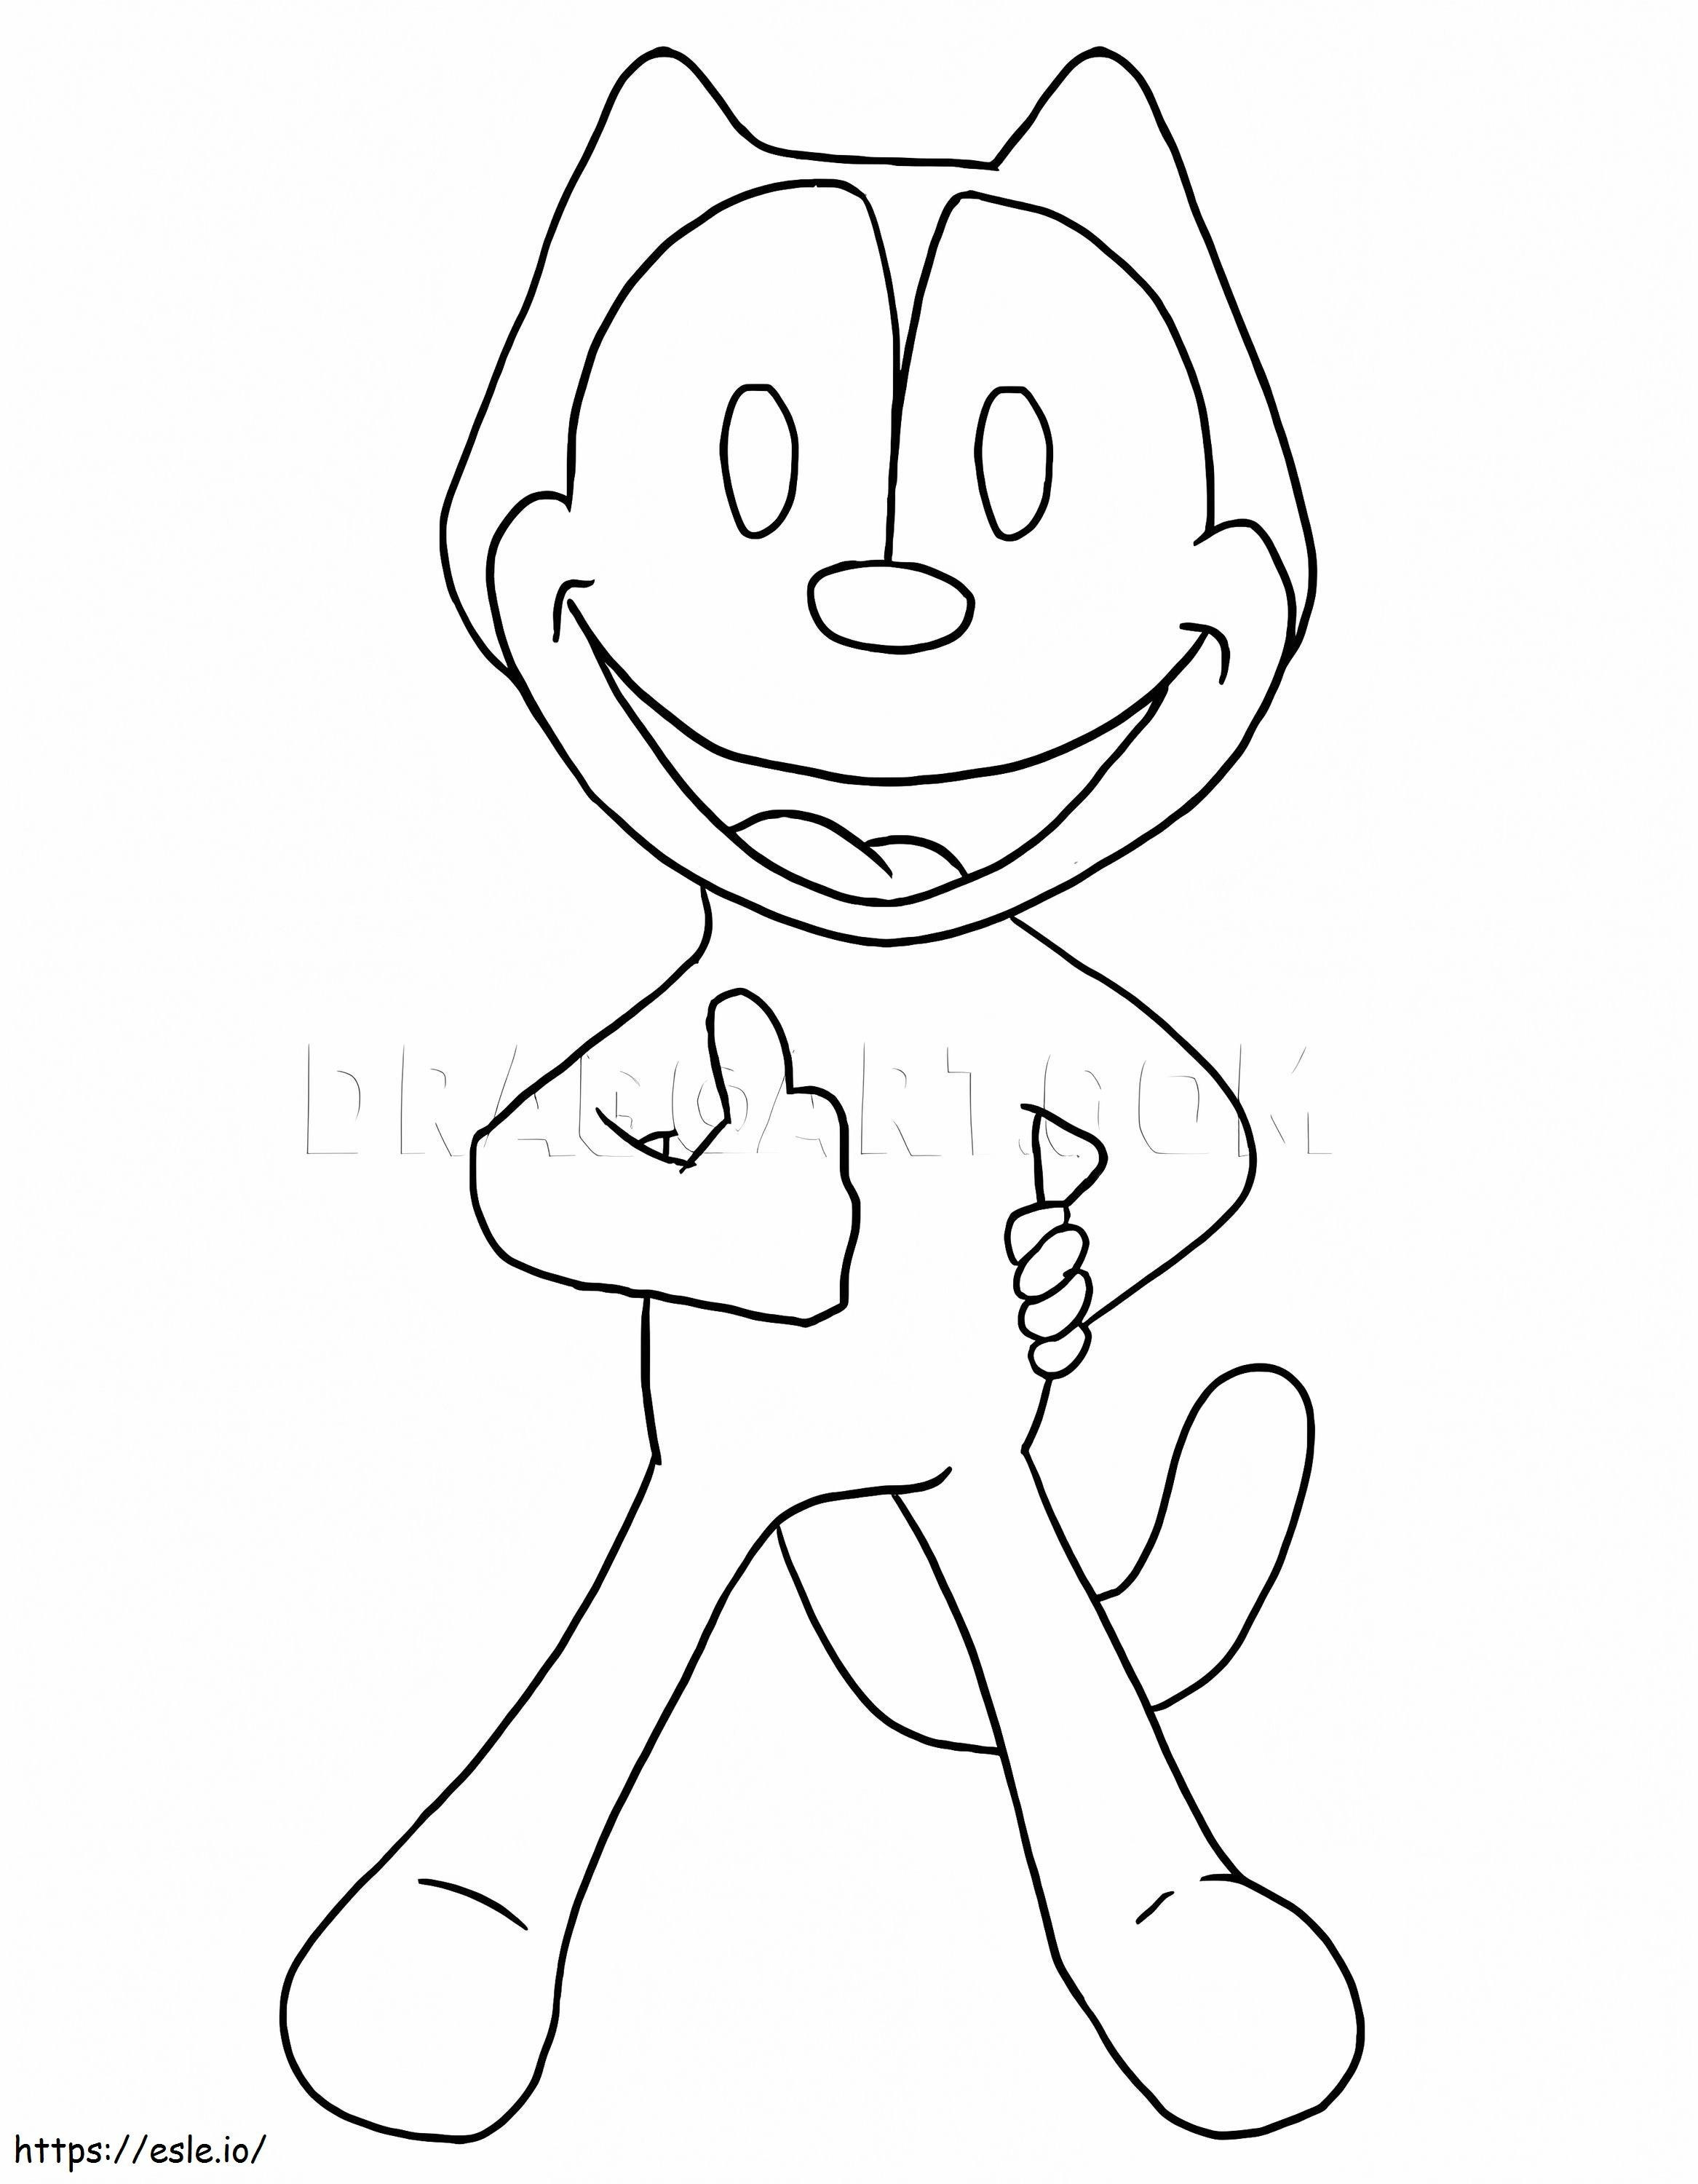 Felix The Cat Smiling coloring page